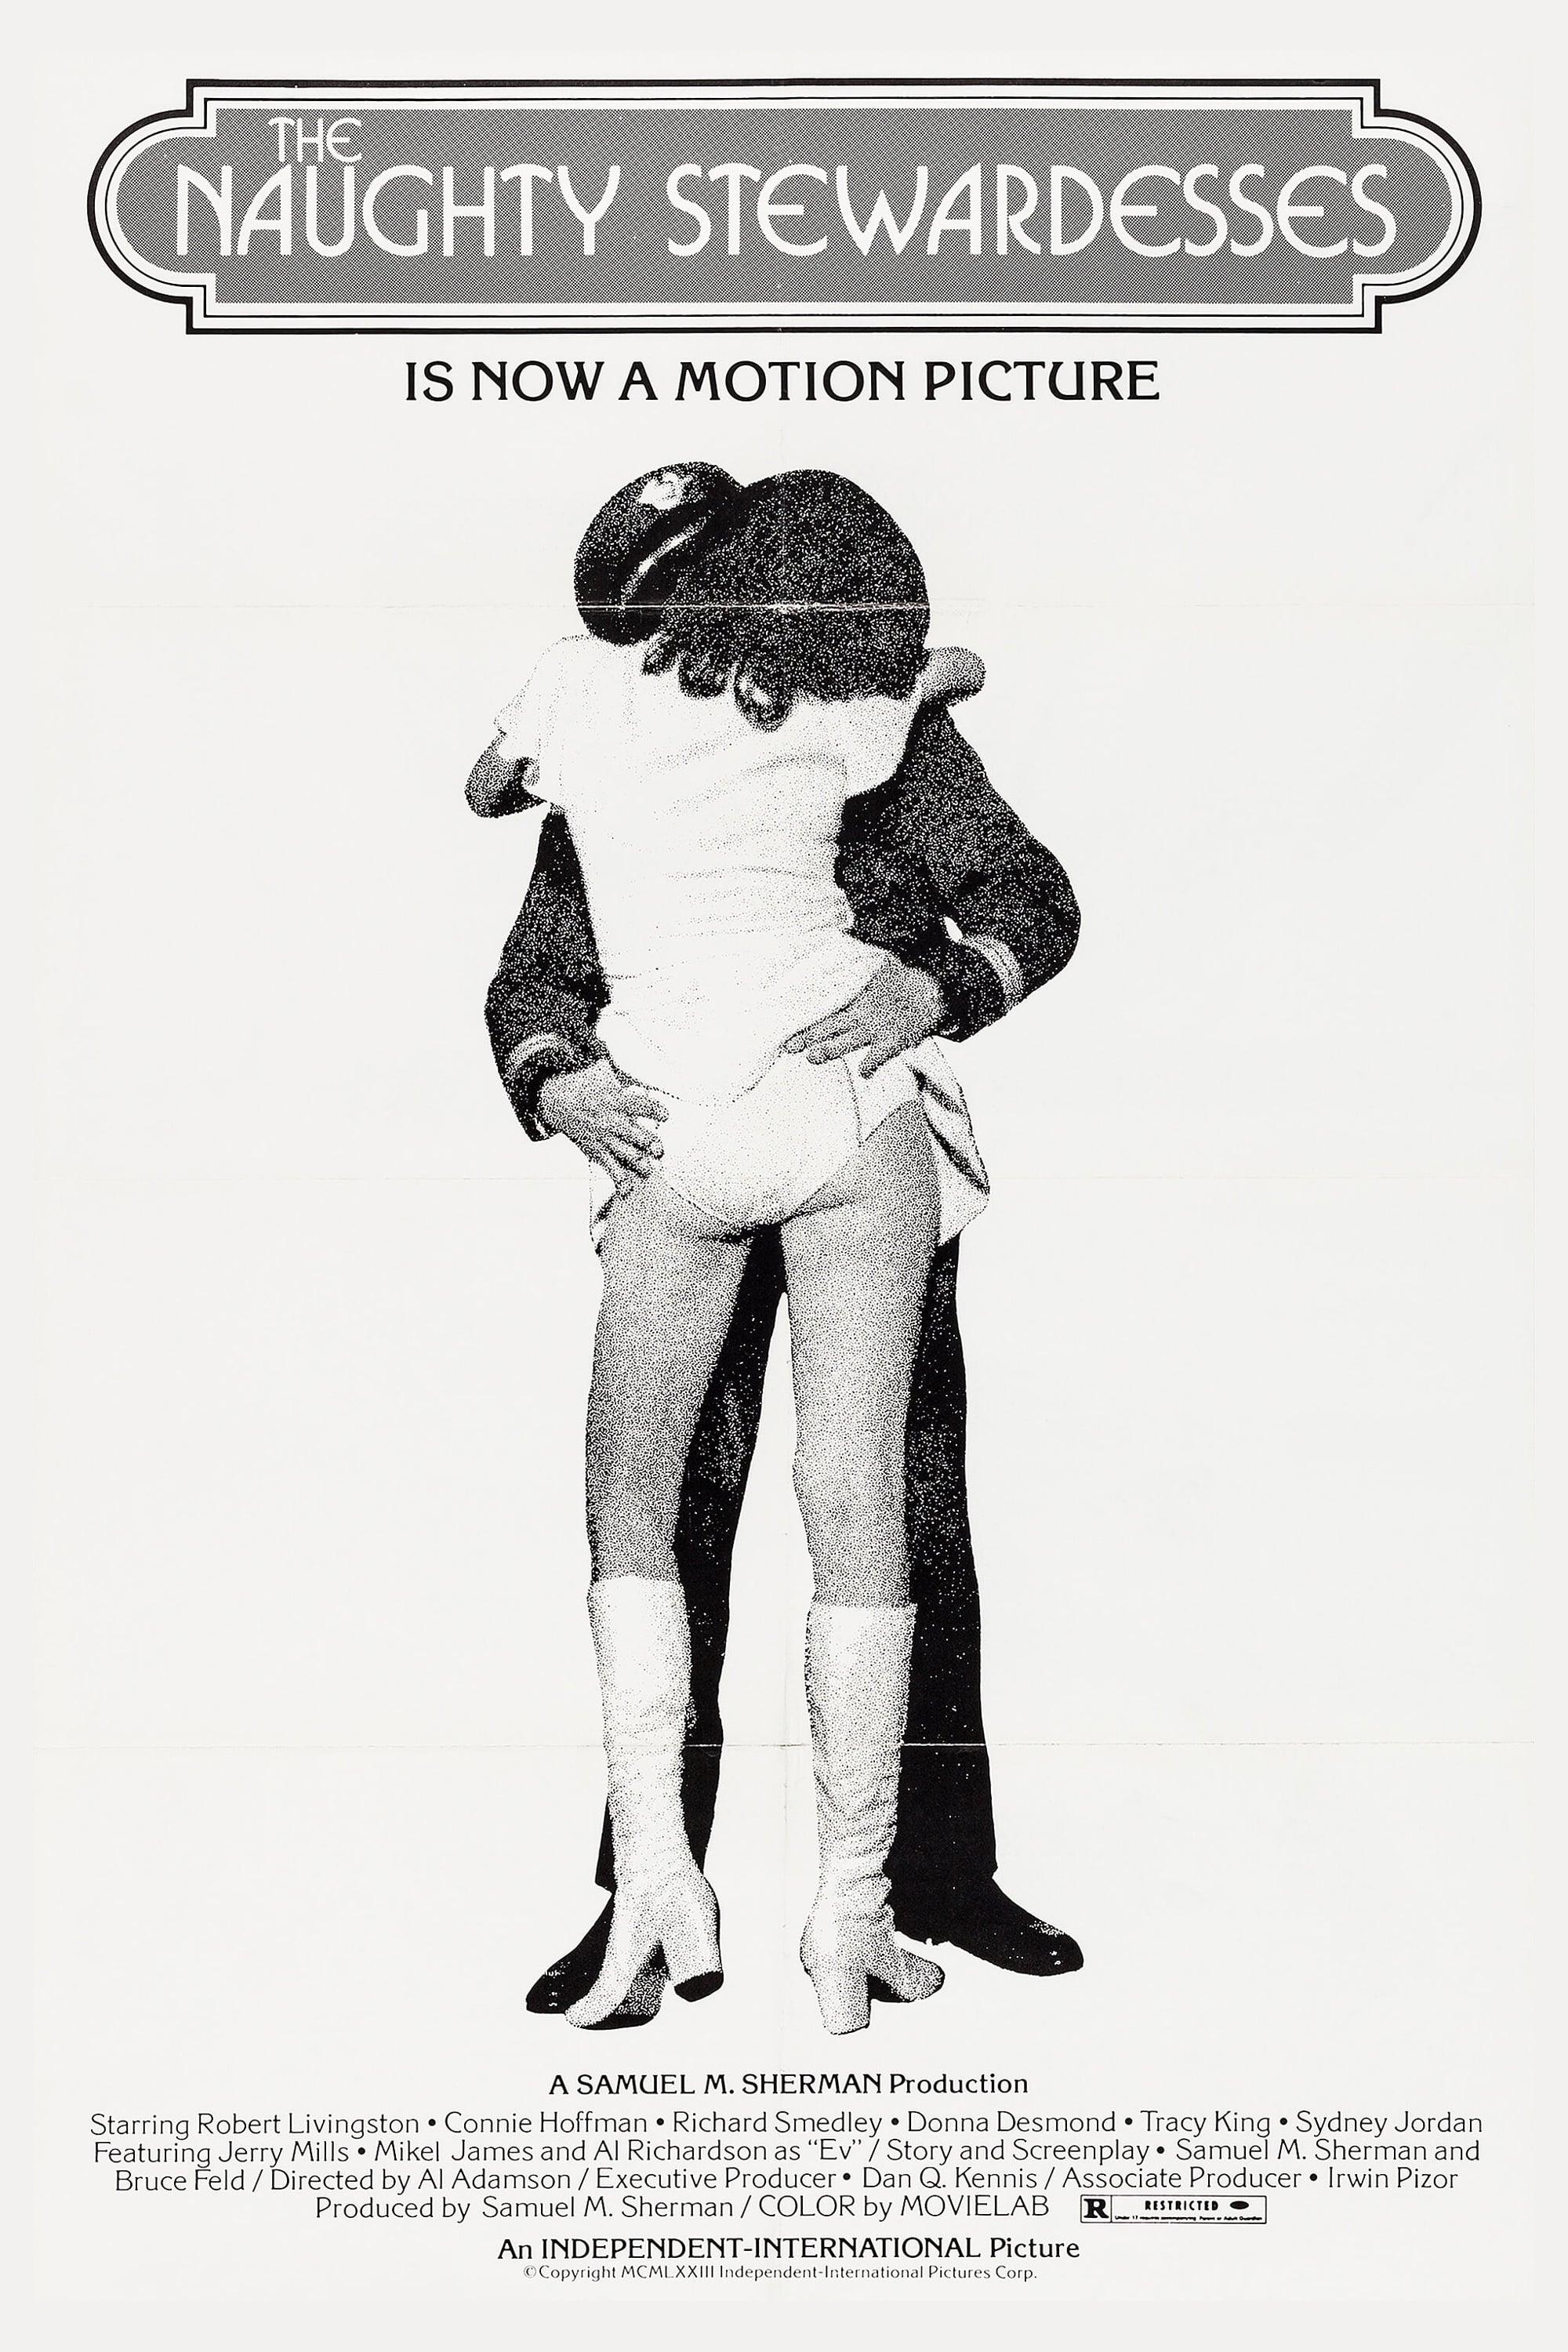 The Naughty Stewardesses poster